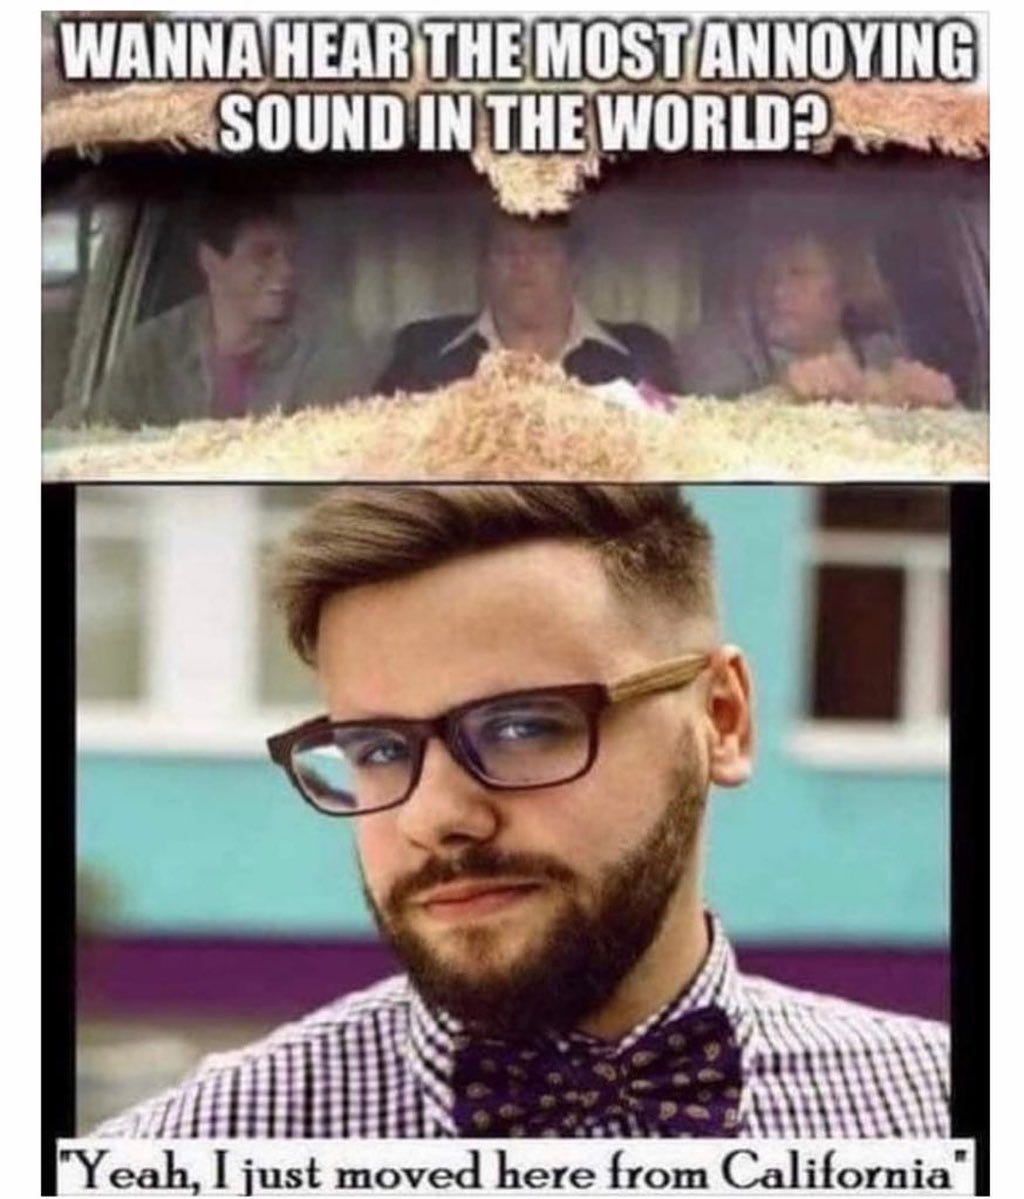 May be an image of 1 person, beard and text that says 'WANNA HEAR THE MOST ANNOYING SOUND IN THE WORLD? "Yeah, I just moved here from California'